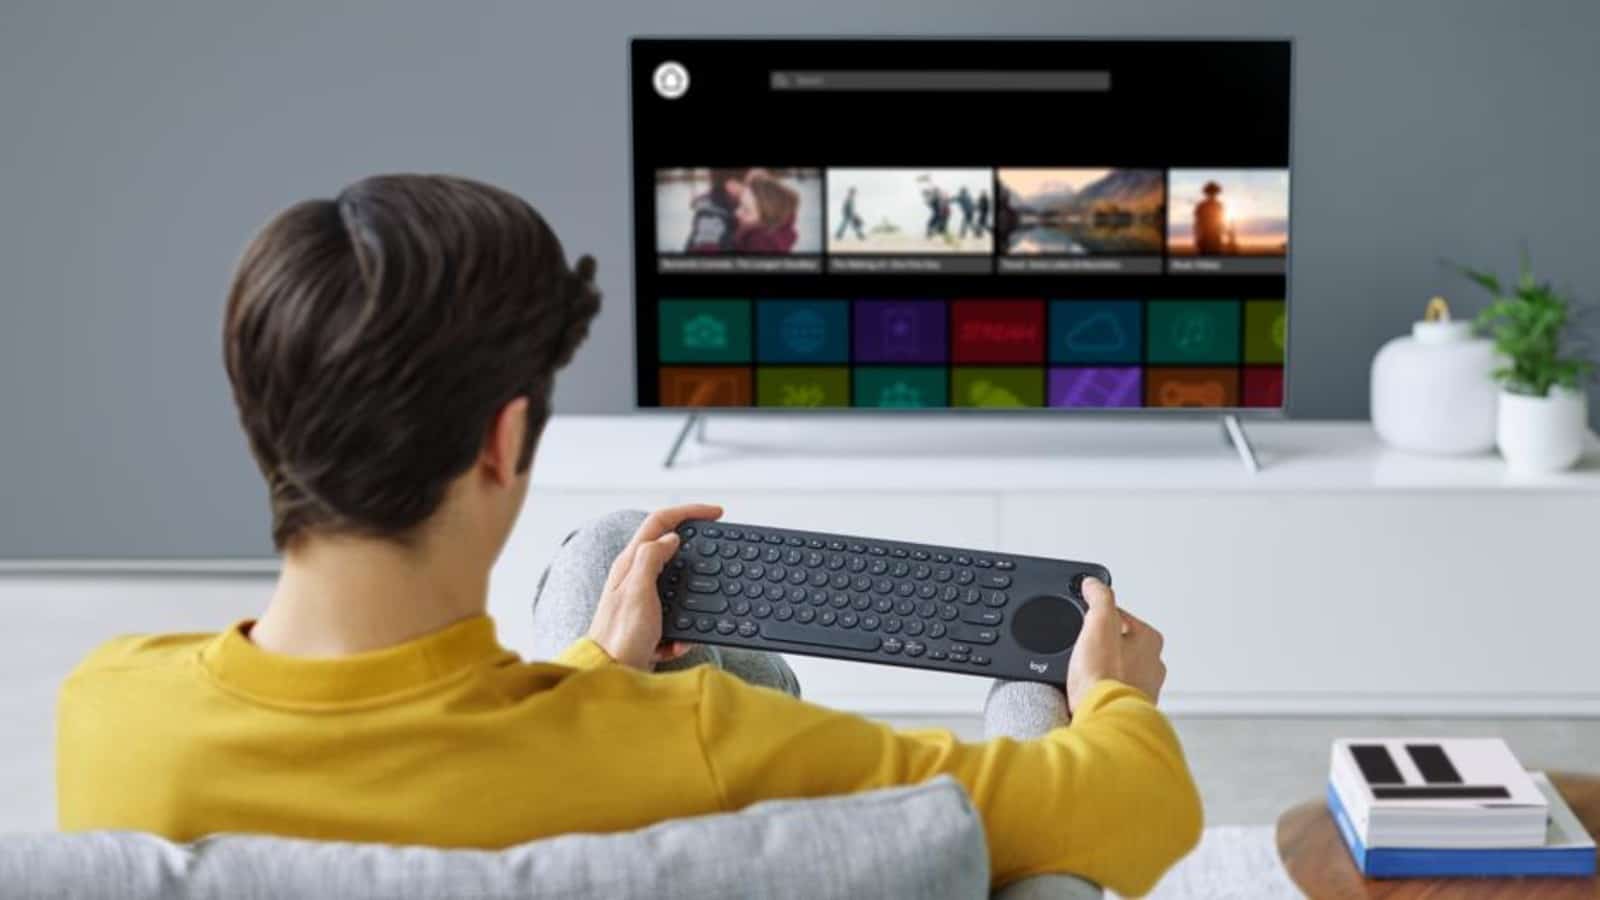 How To Use A Keyboard On A Smart TV